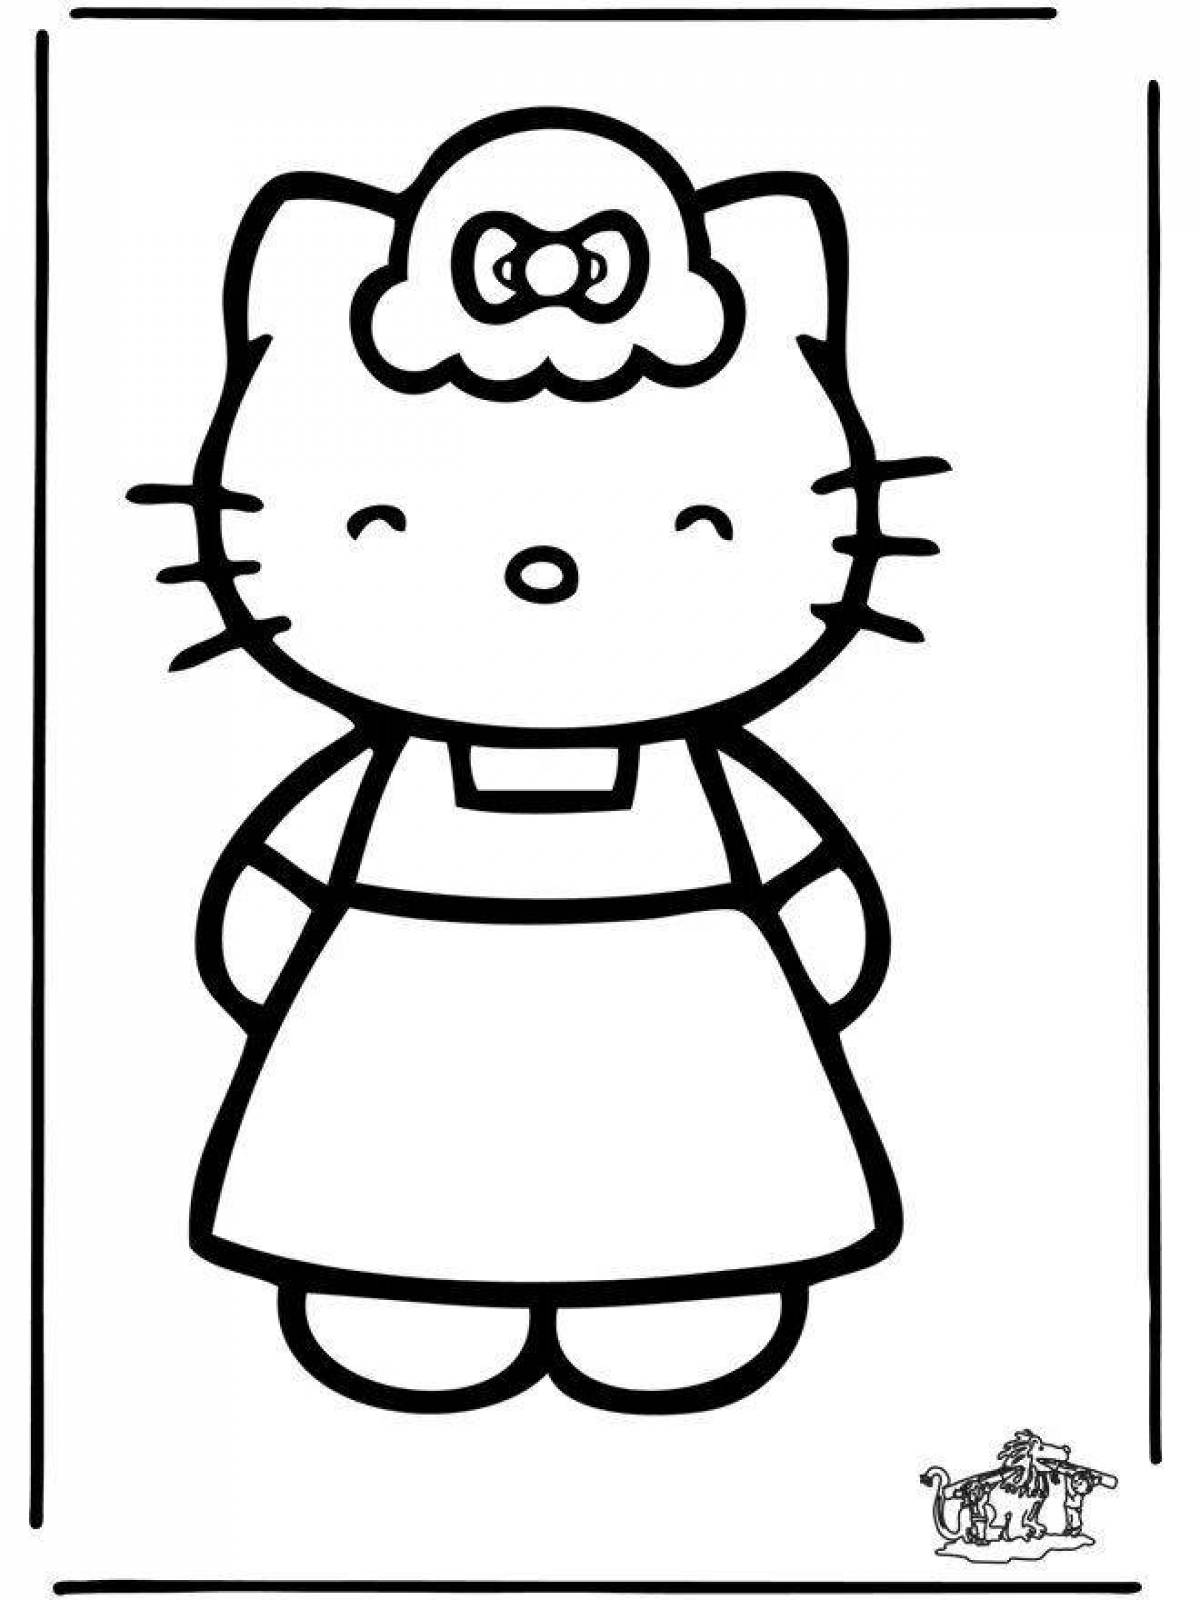 An animated hello kitty frog coloring page